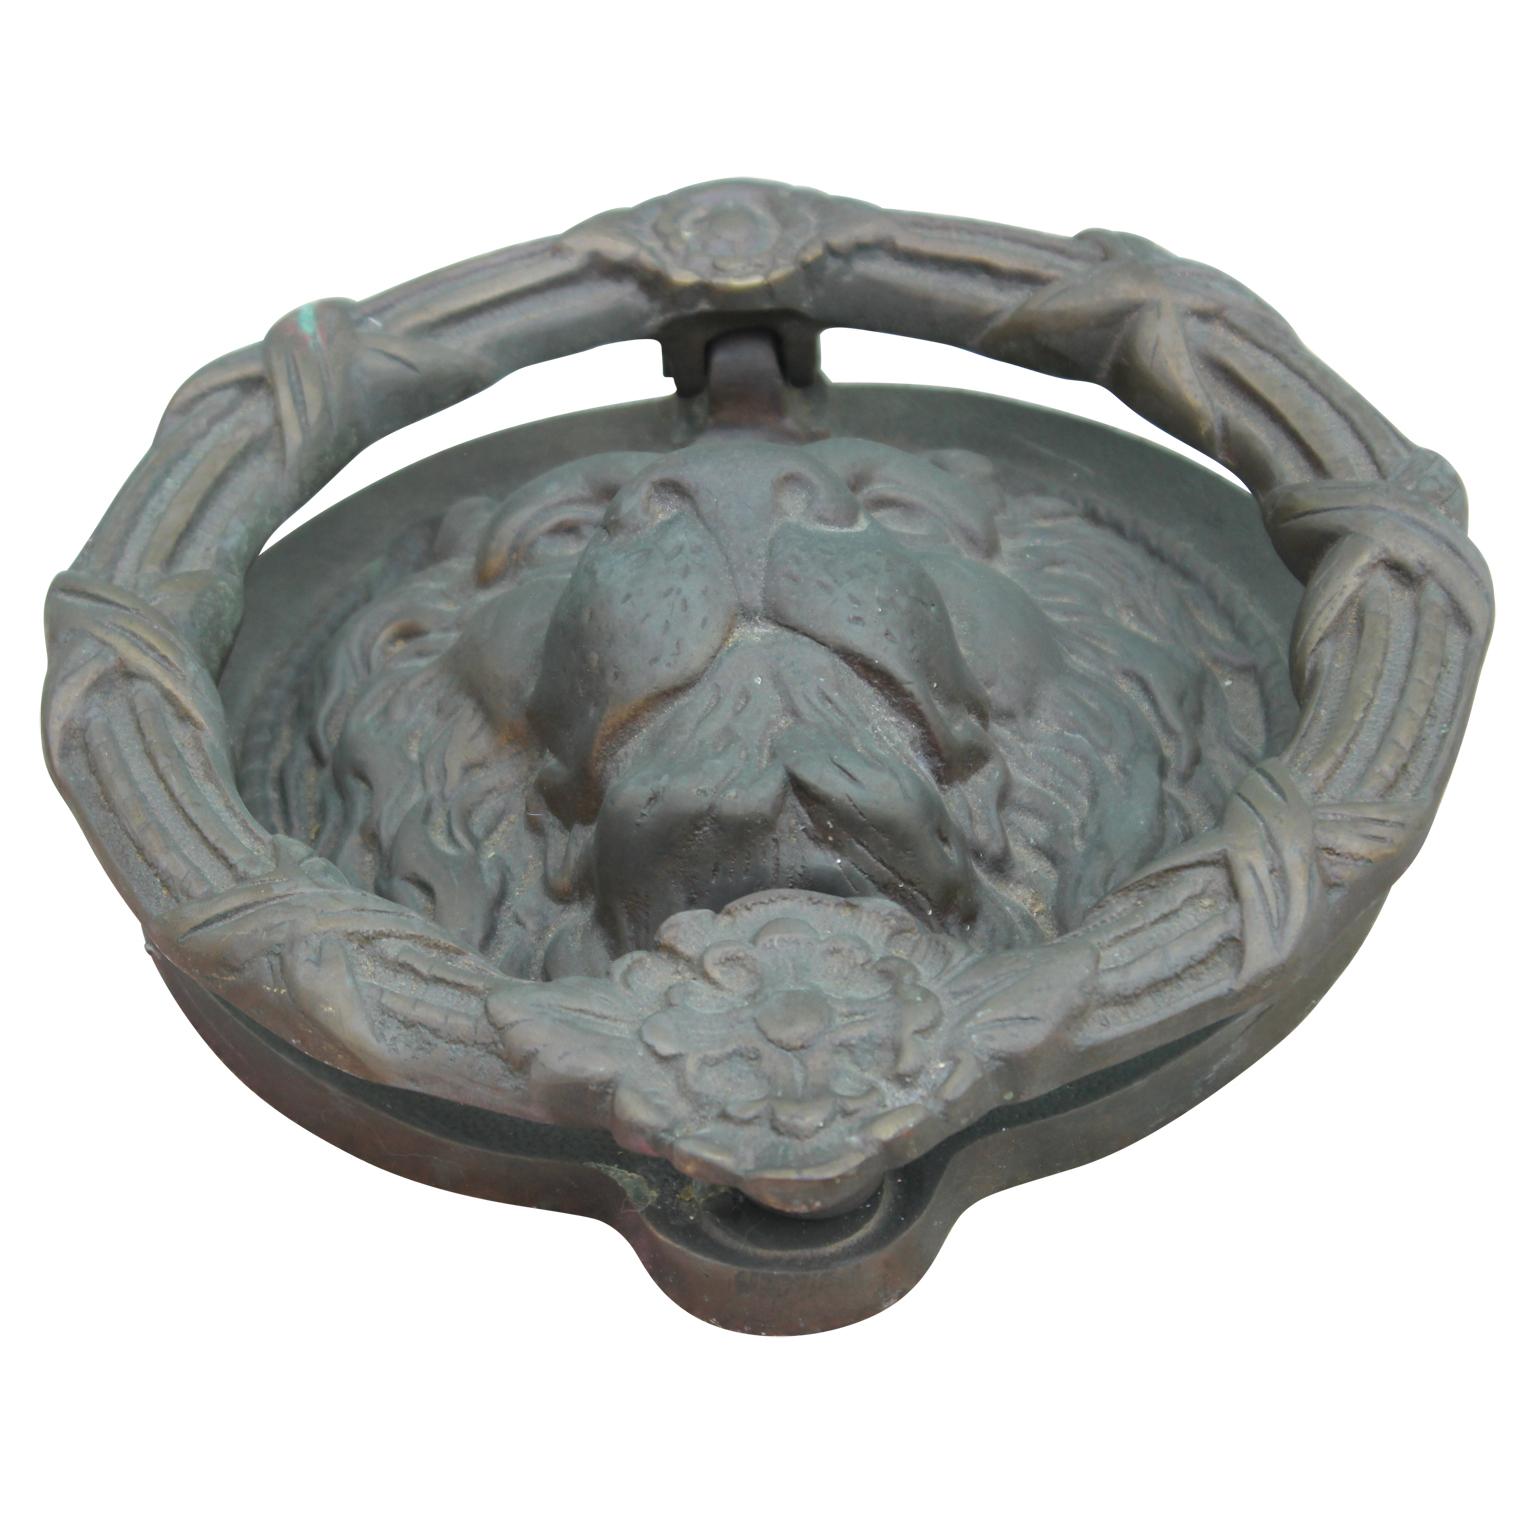 19th century monumental French bronze door knocker in the shape of a lion head in the style of Louis XV. The bronze has a nice patina consistent with age and use.